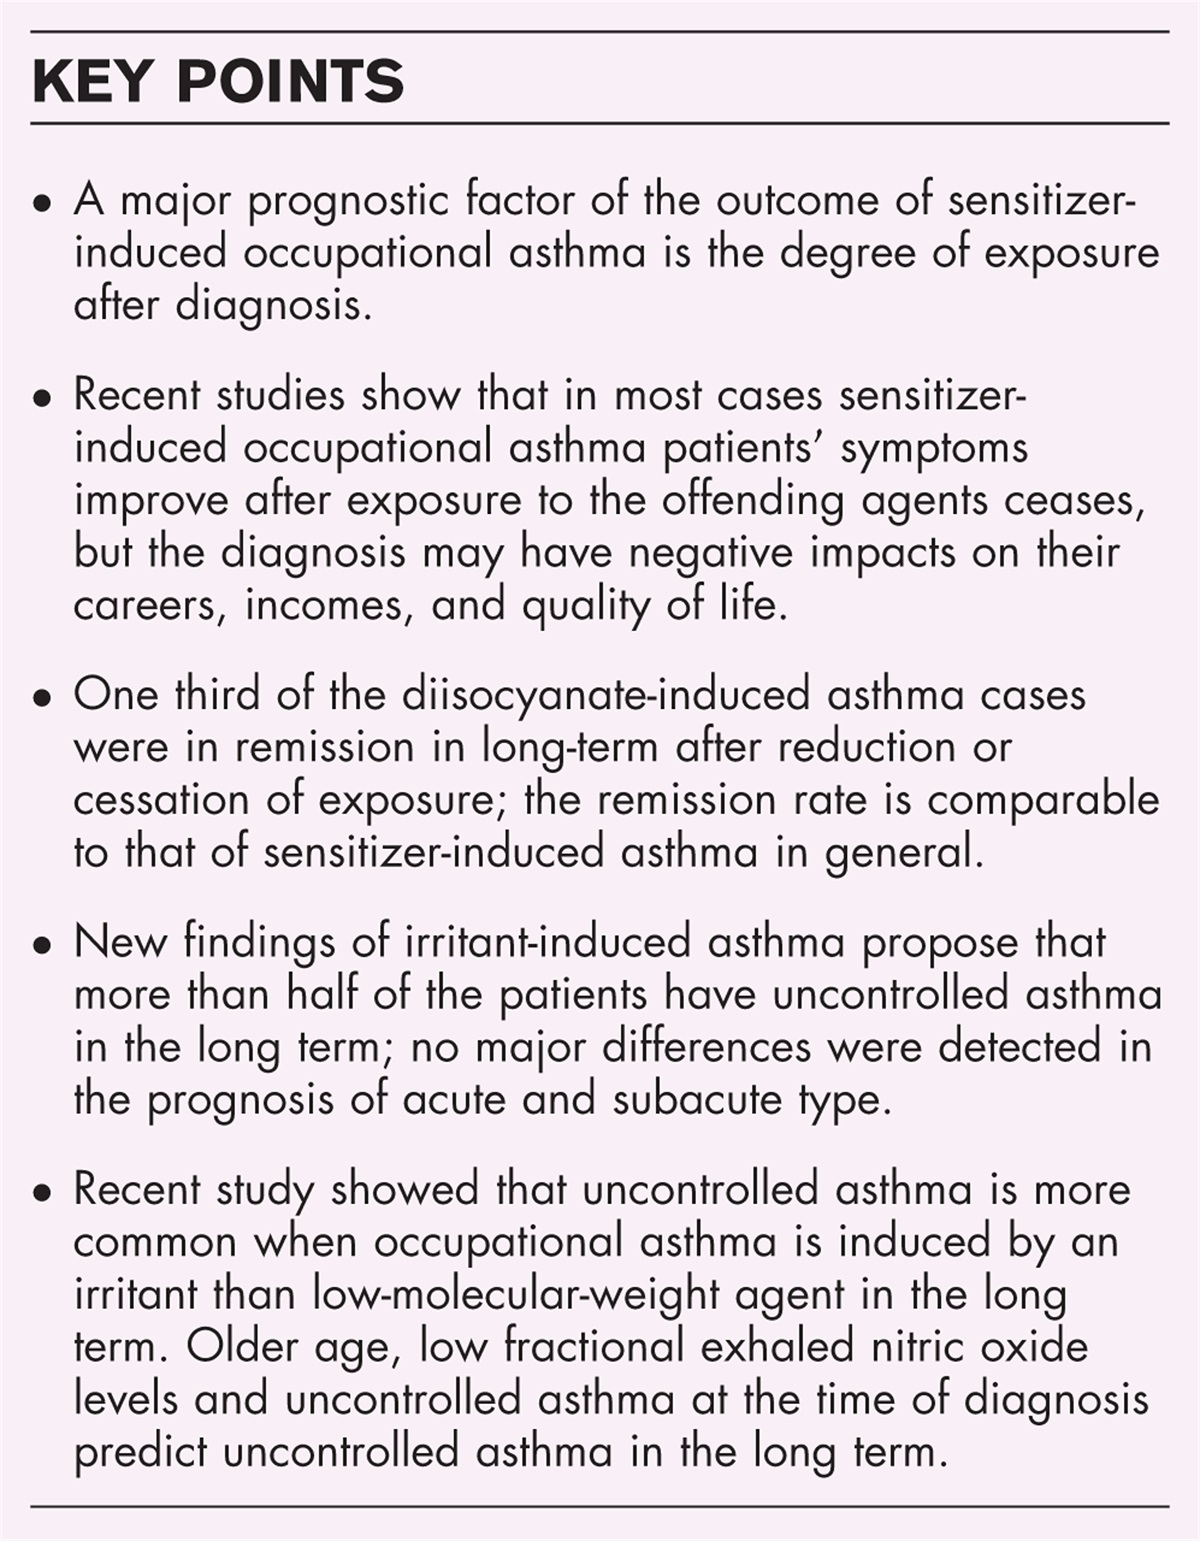 Long-term outcome of occupational asthma with different etiology